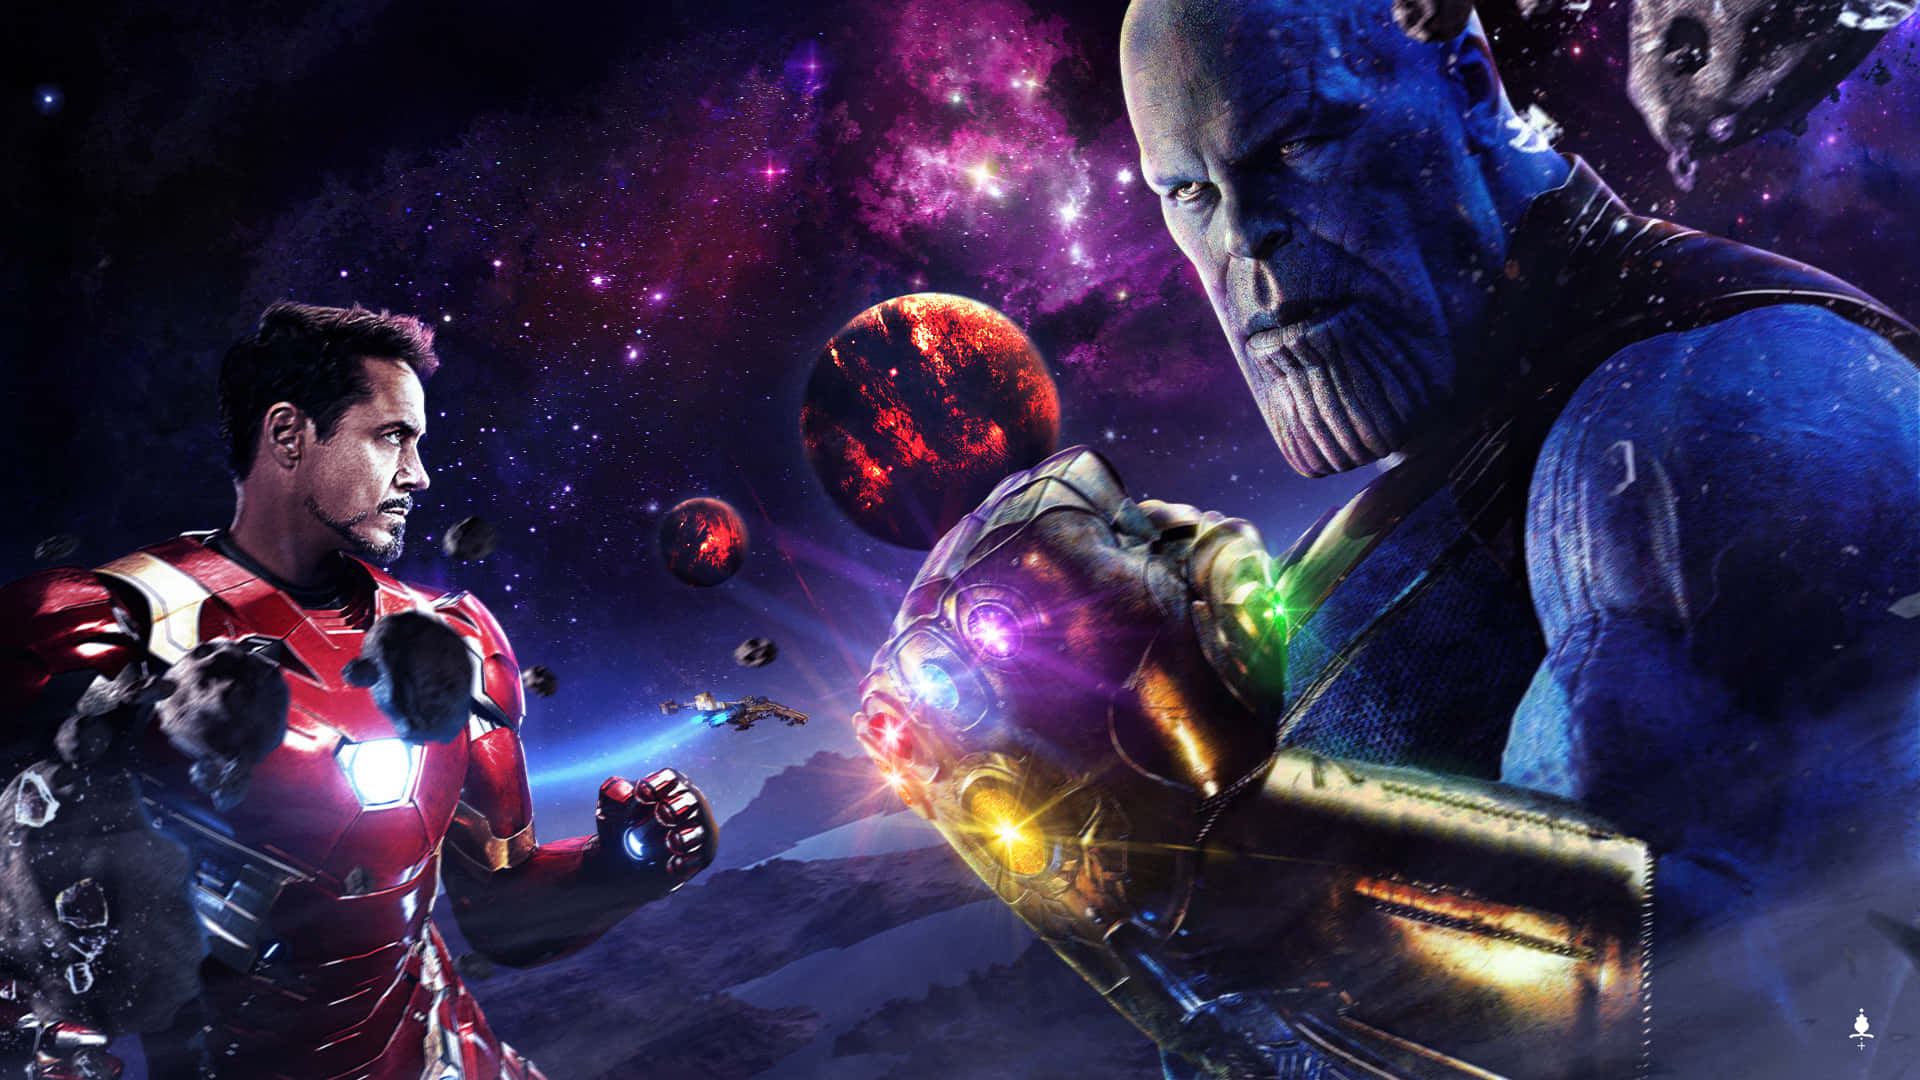 Iron Man battles Thanos for the fate of the universe. Wallpaper